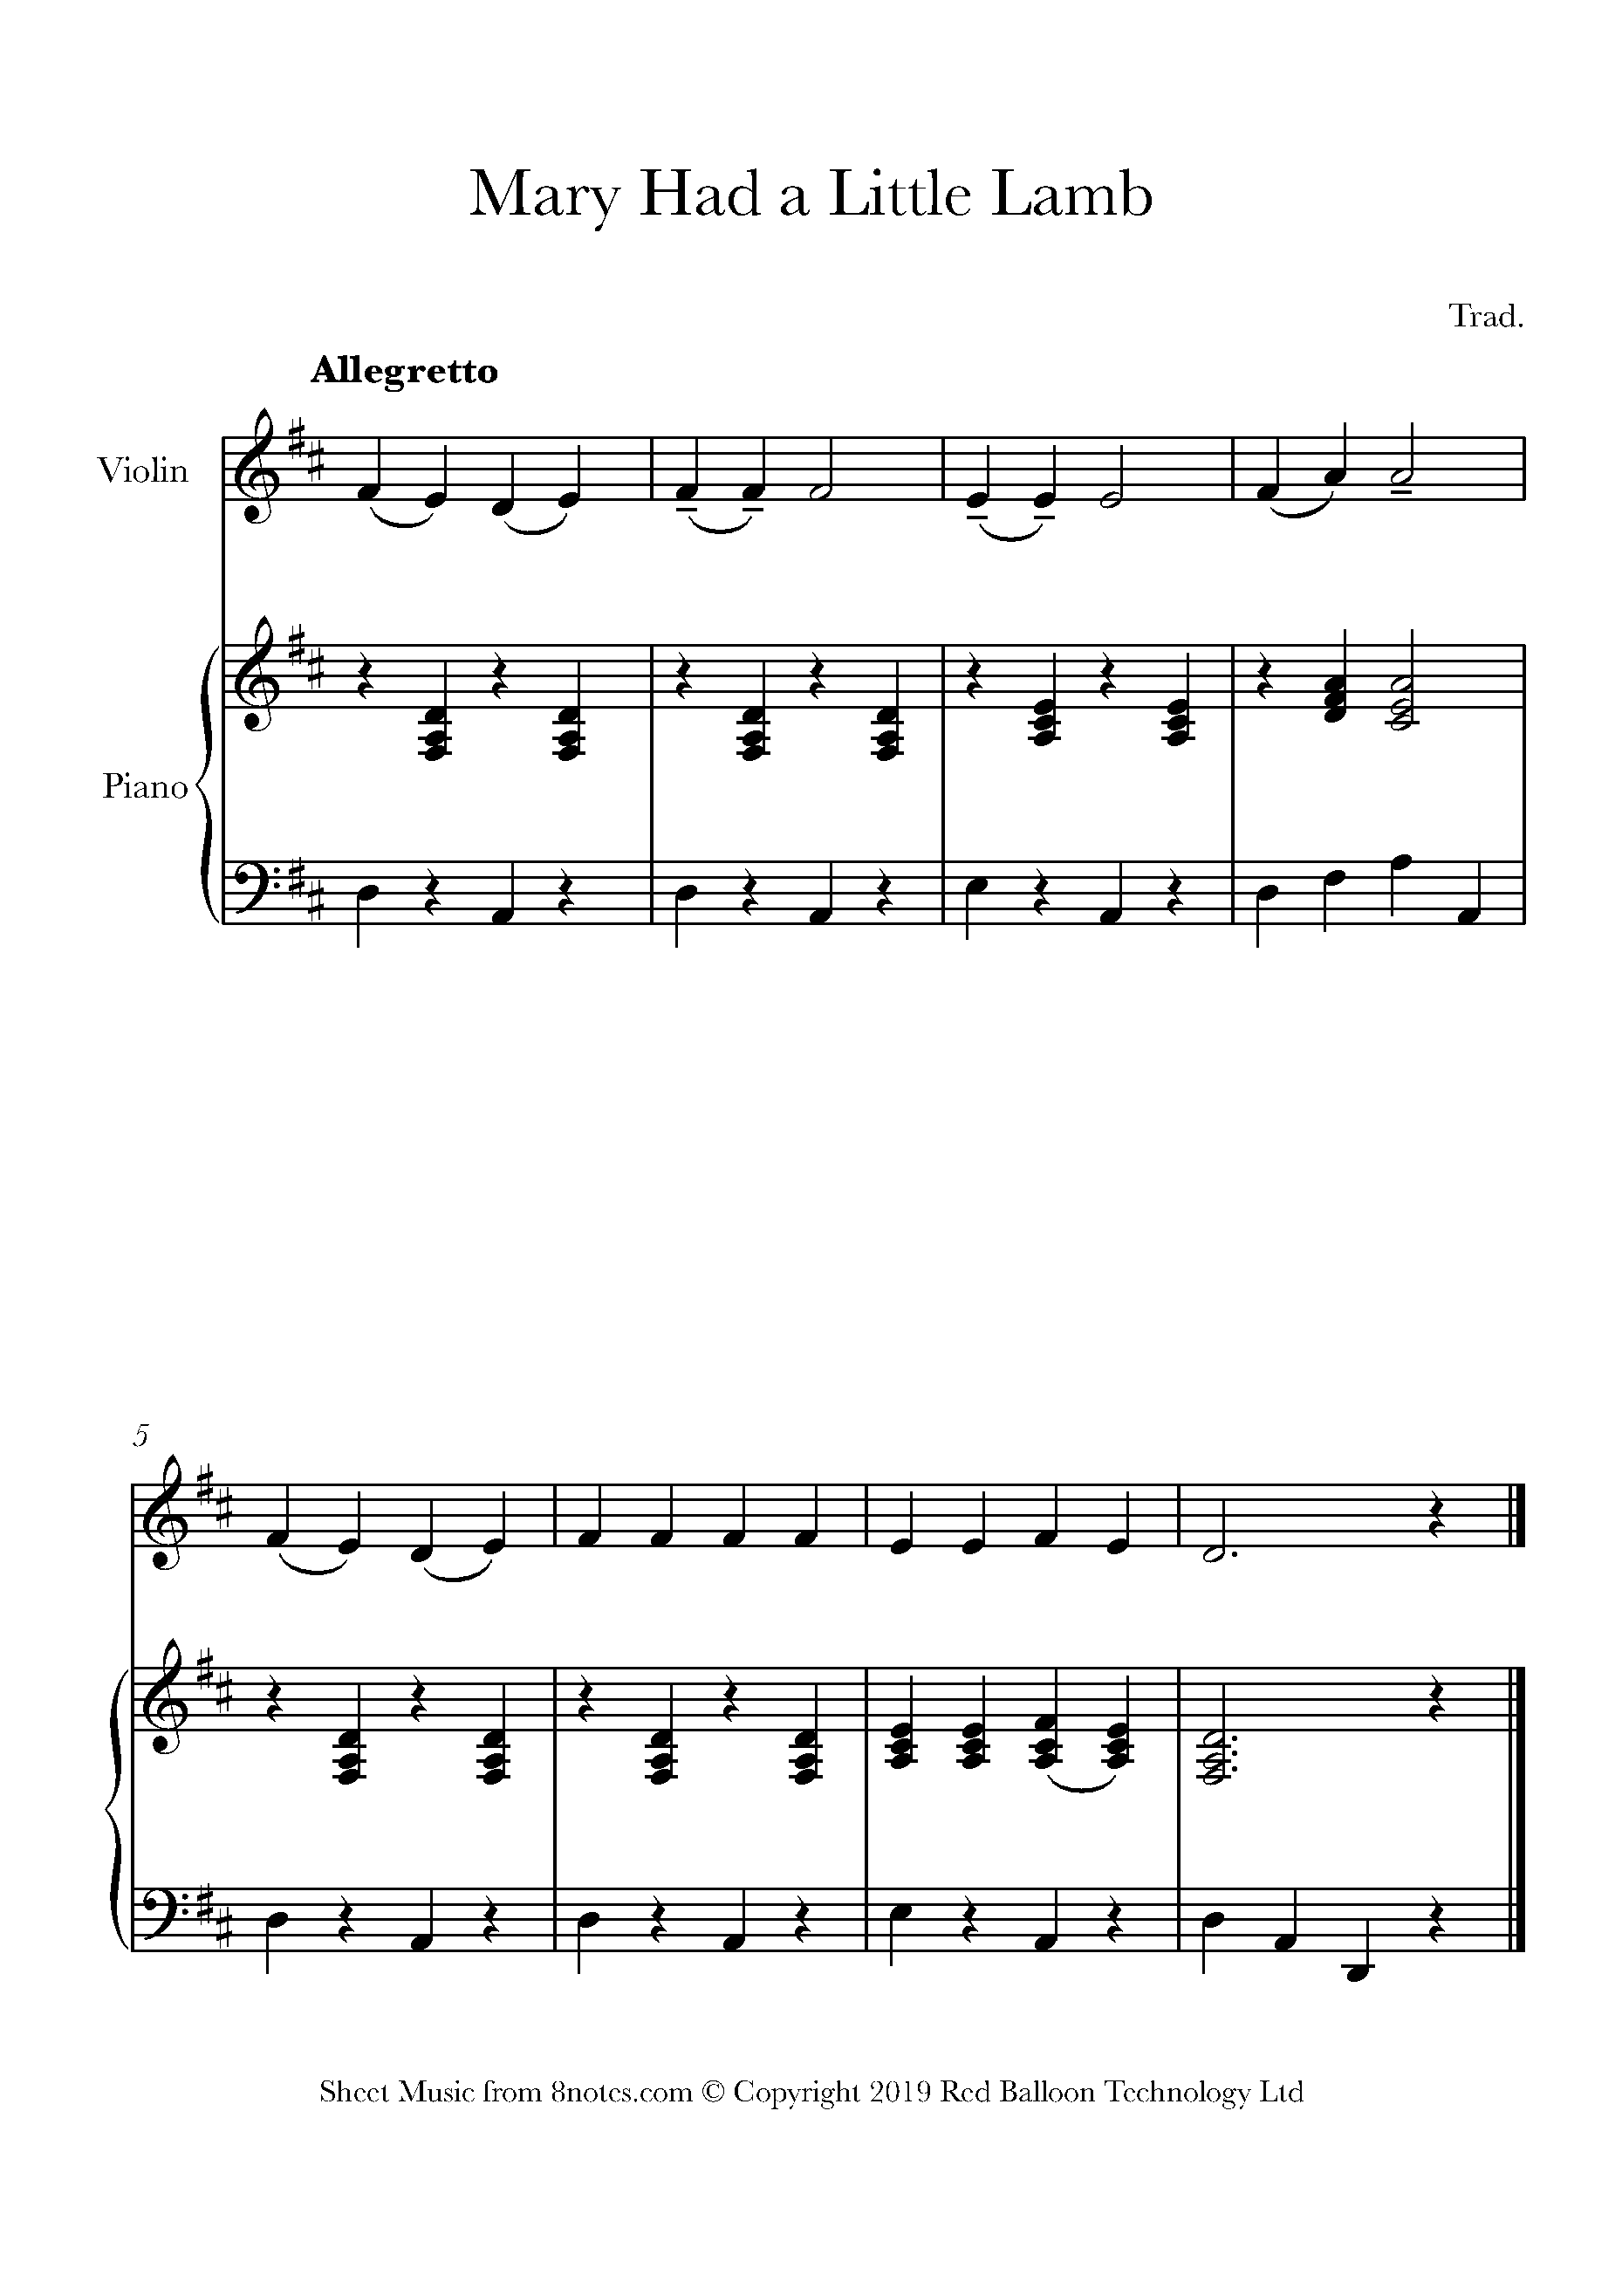 mary-had-a-little-lamb-sheet-music-for-violin-8notes